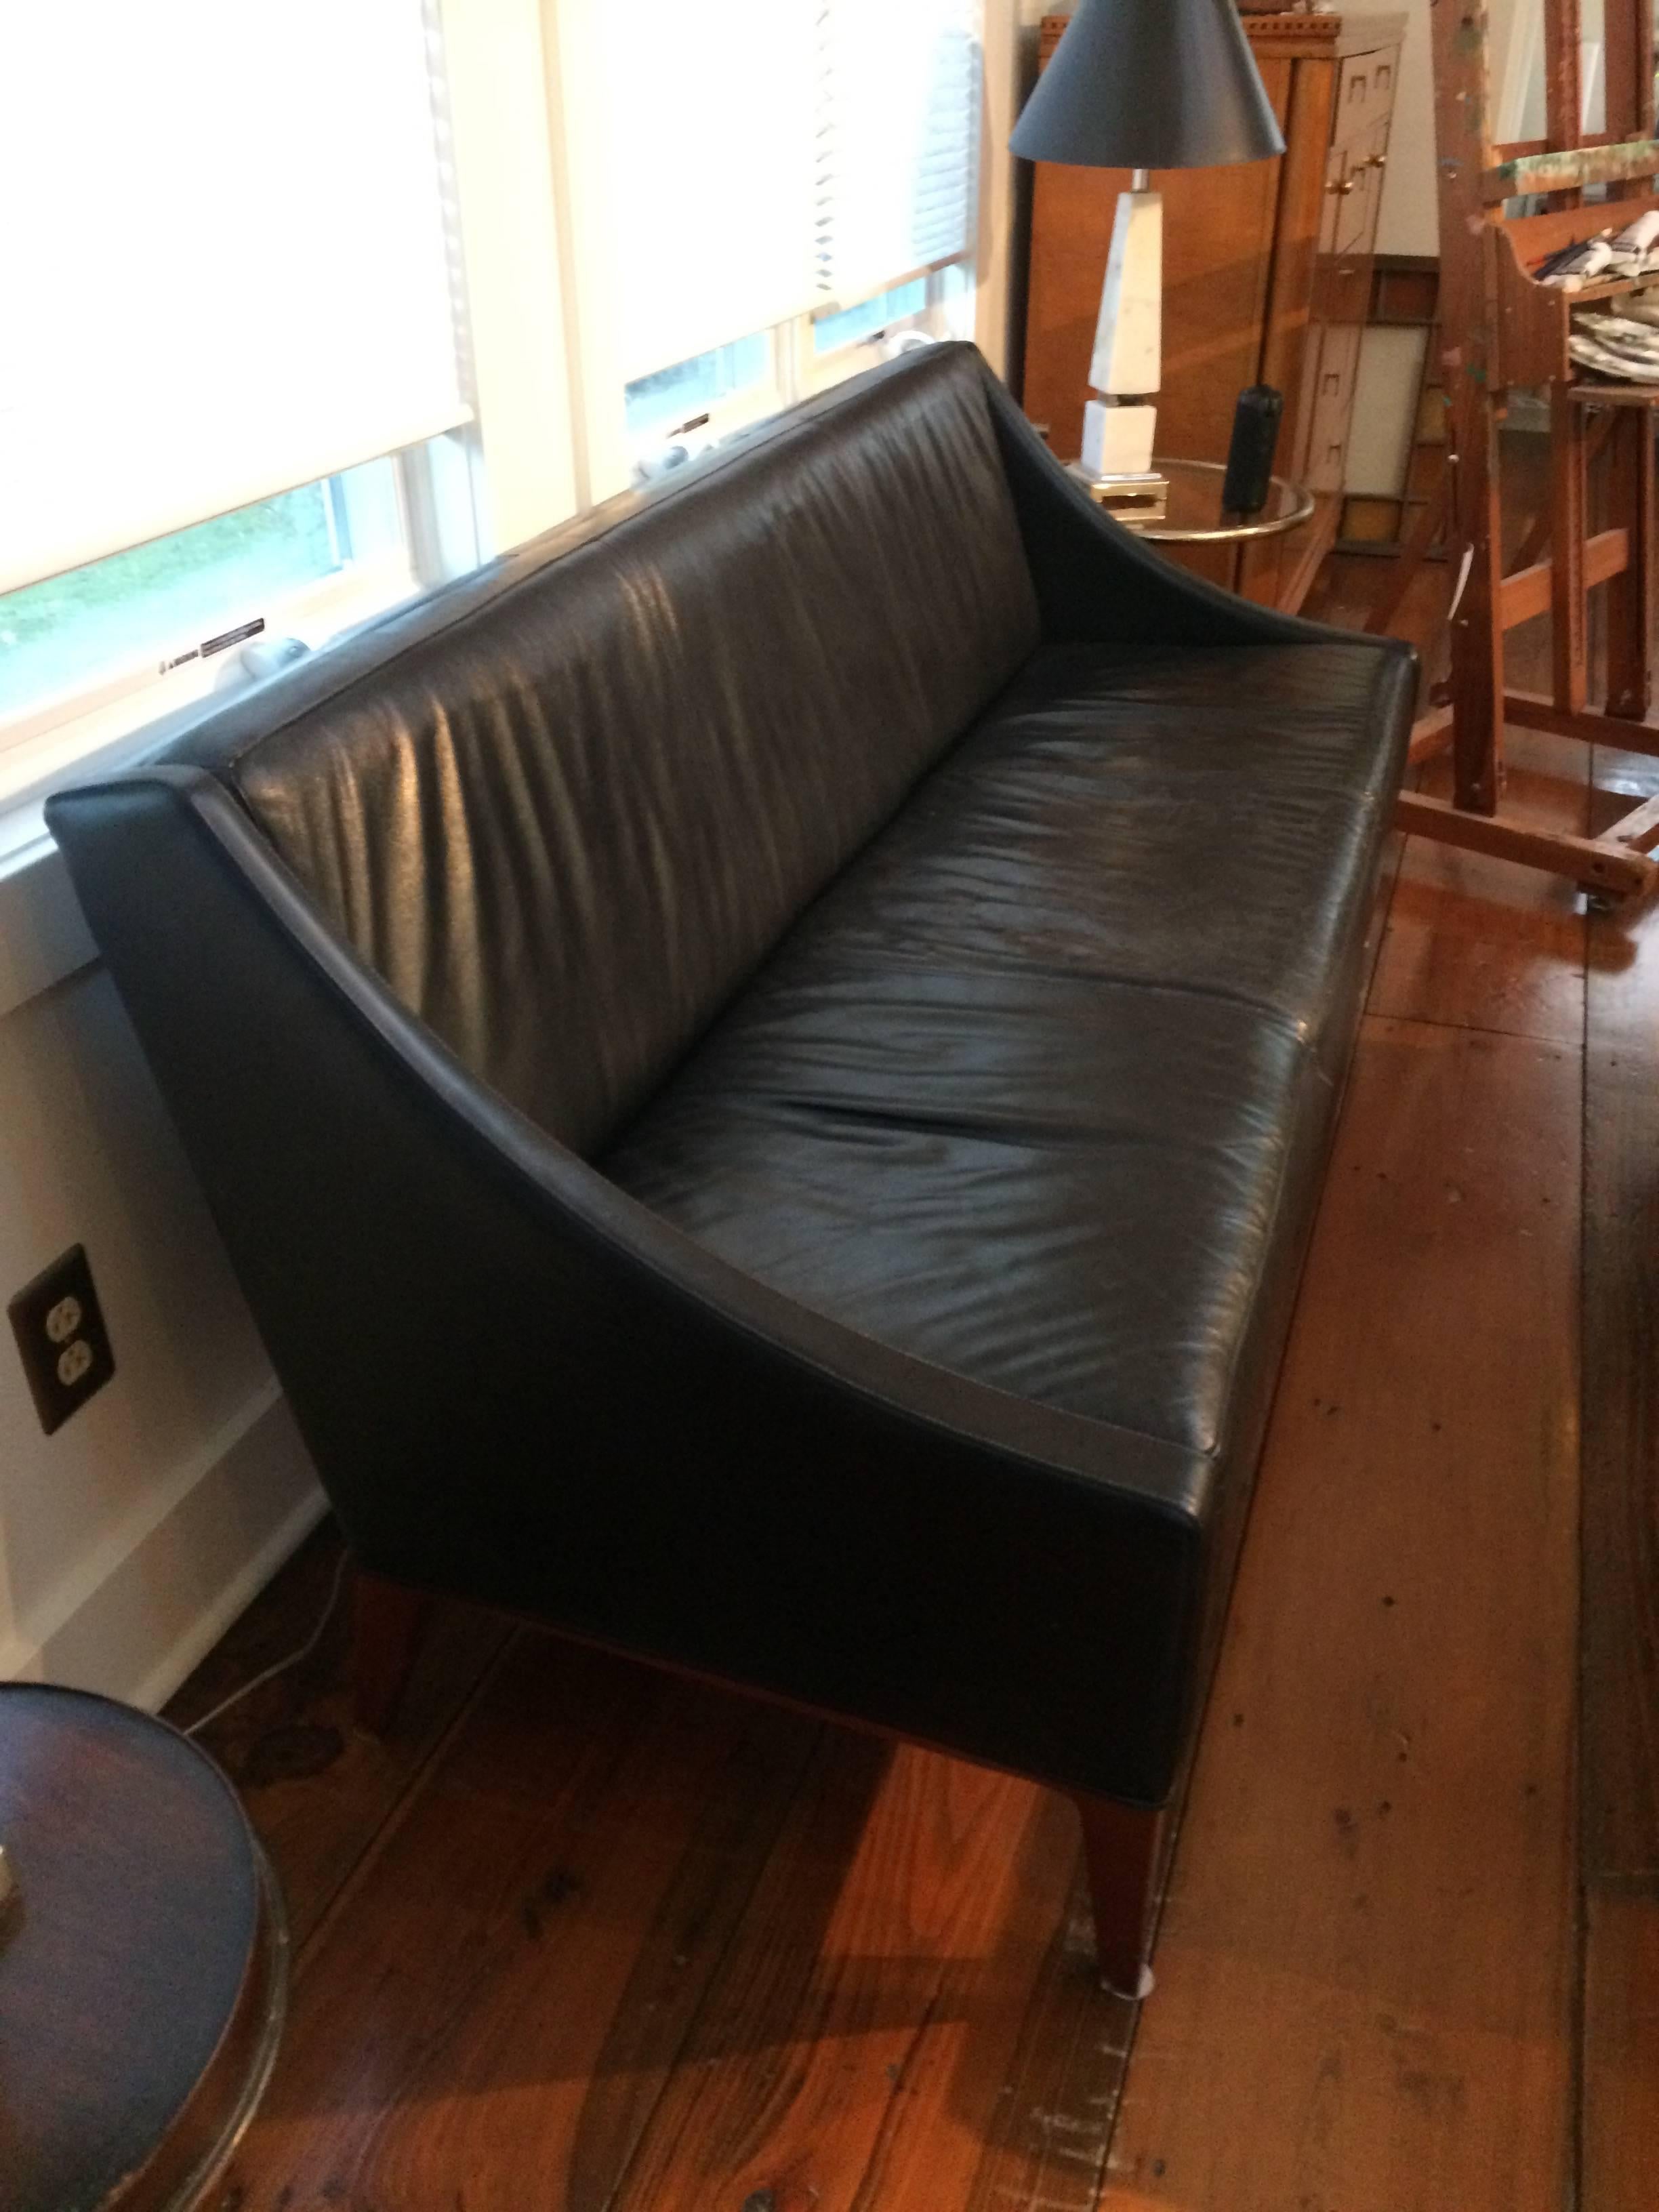 American Sophisticated Men's Club Mid-Century Modern Black Leather Couch